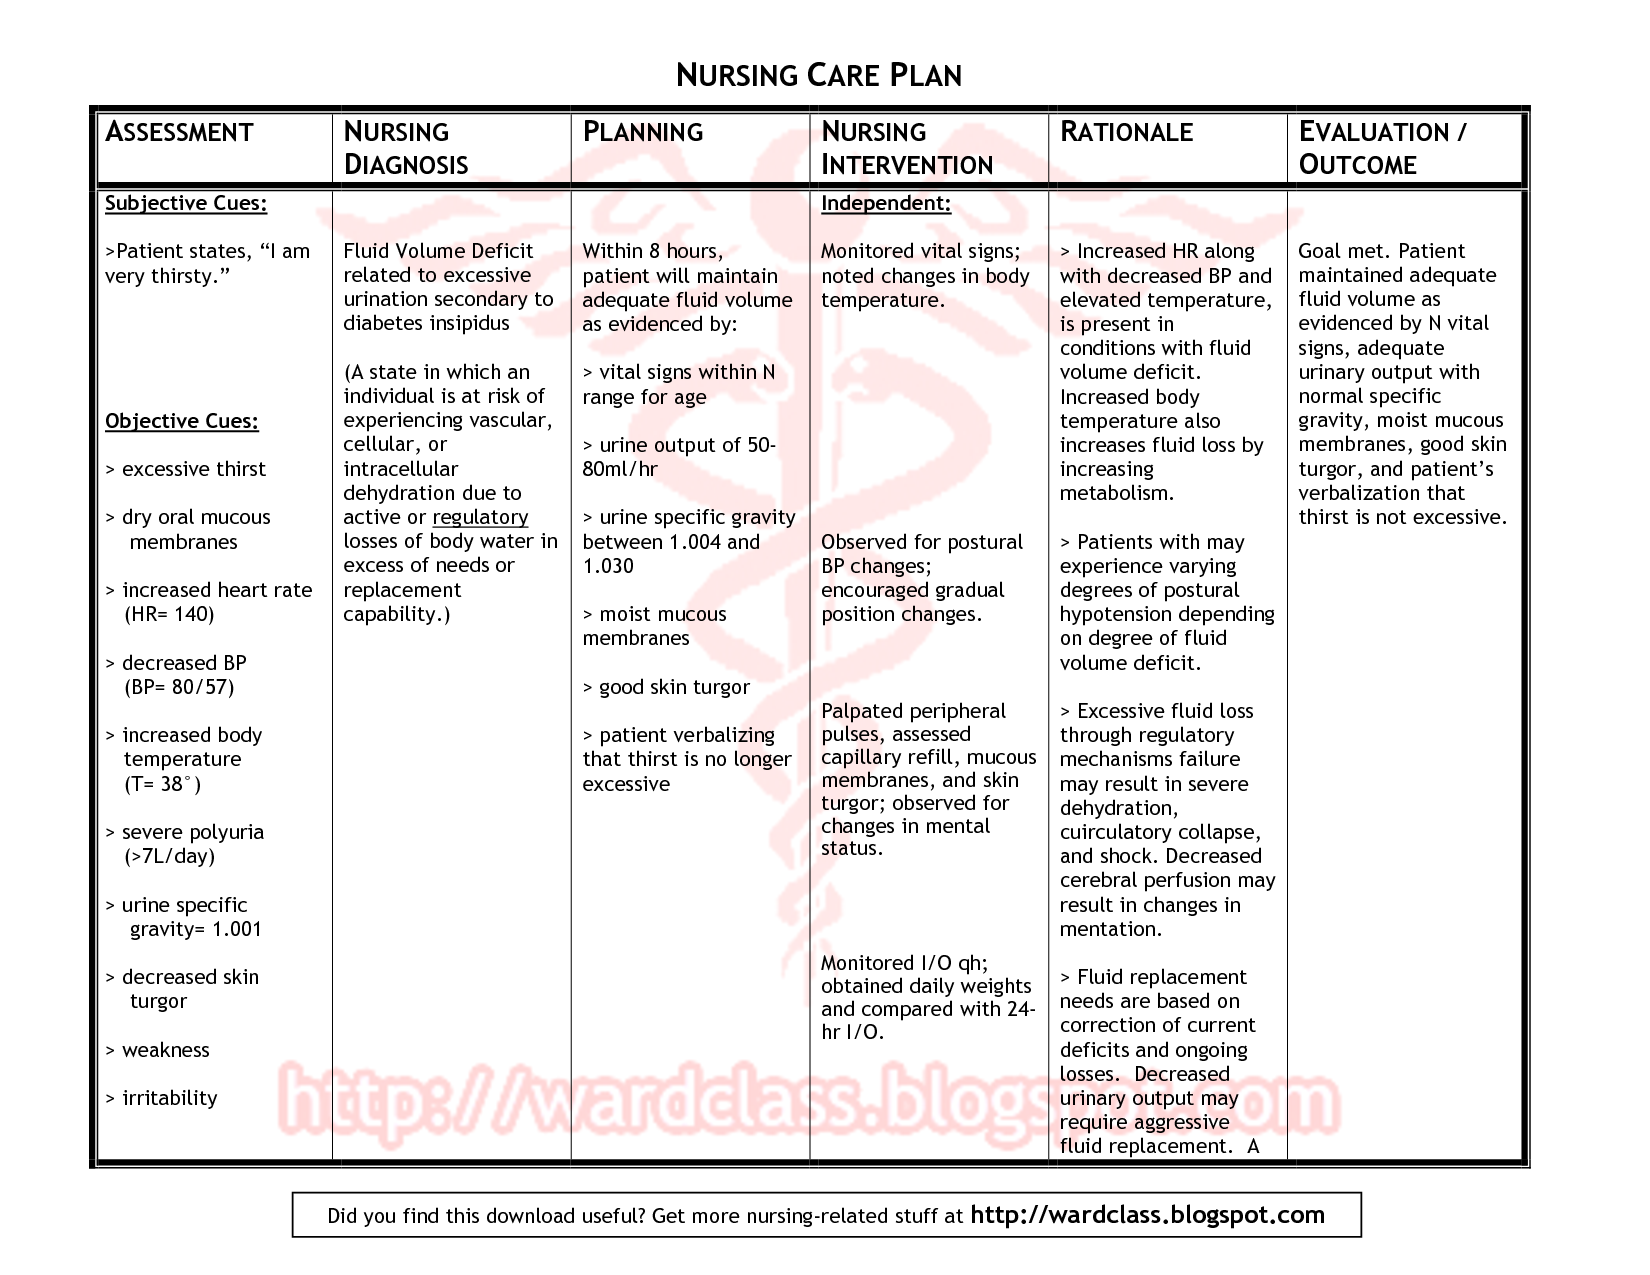 Care plan for hyperlipidemia for patients